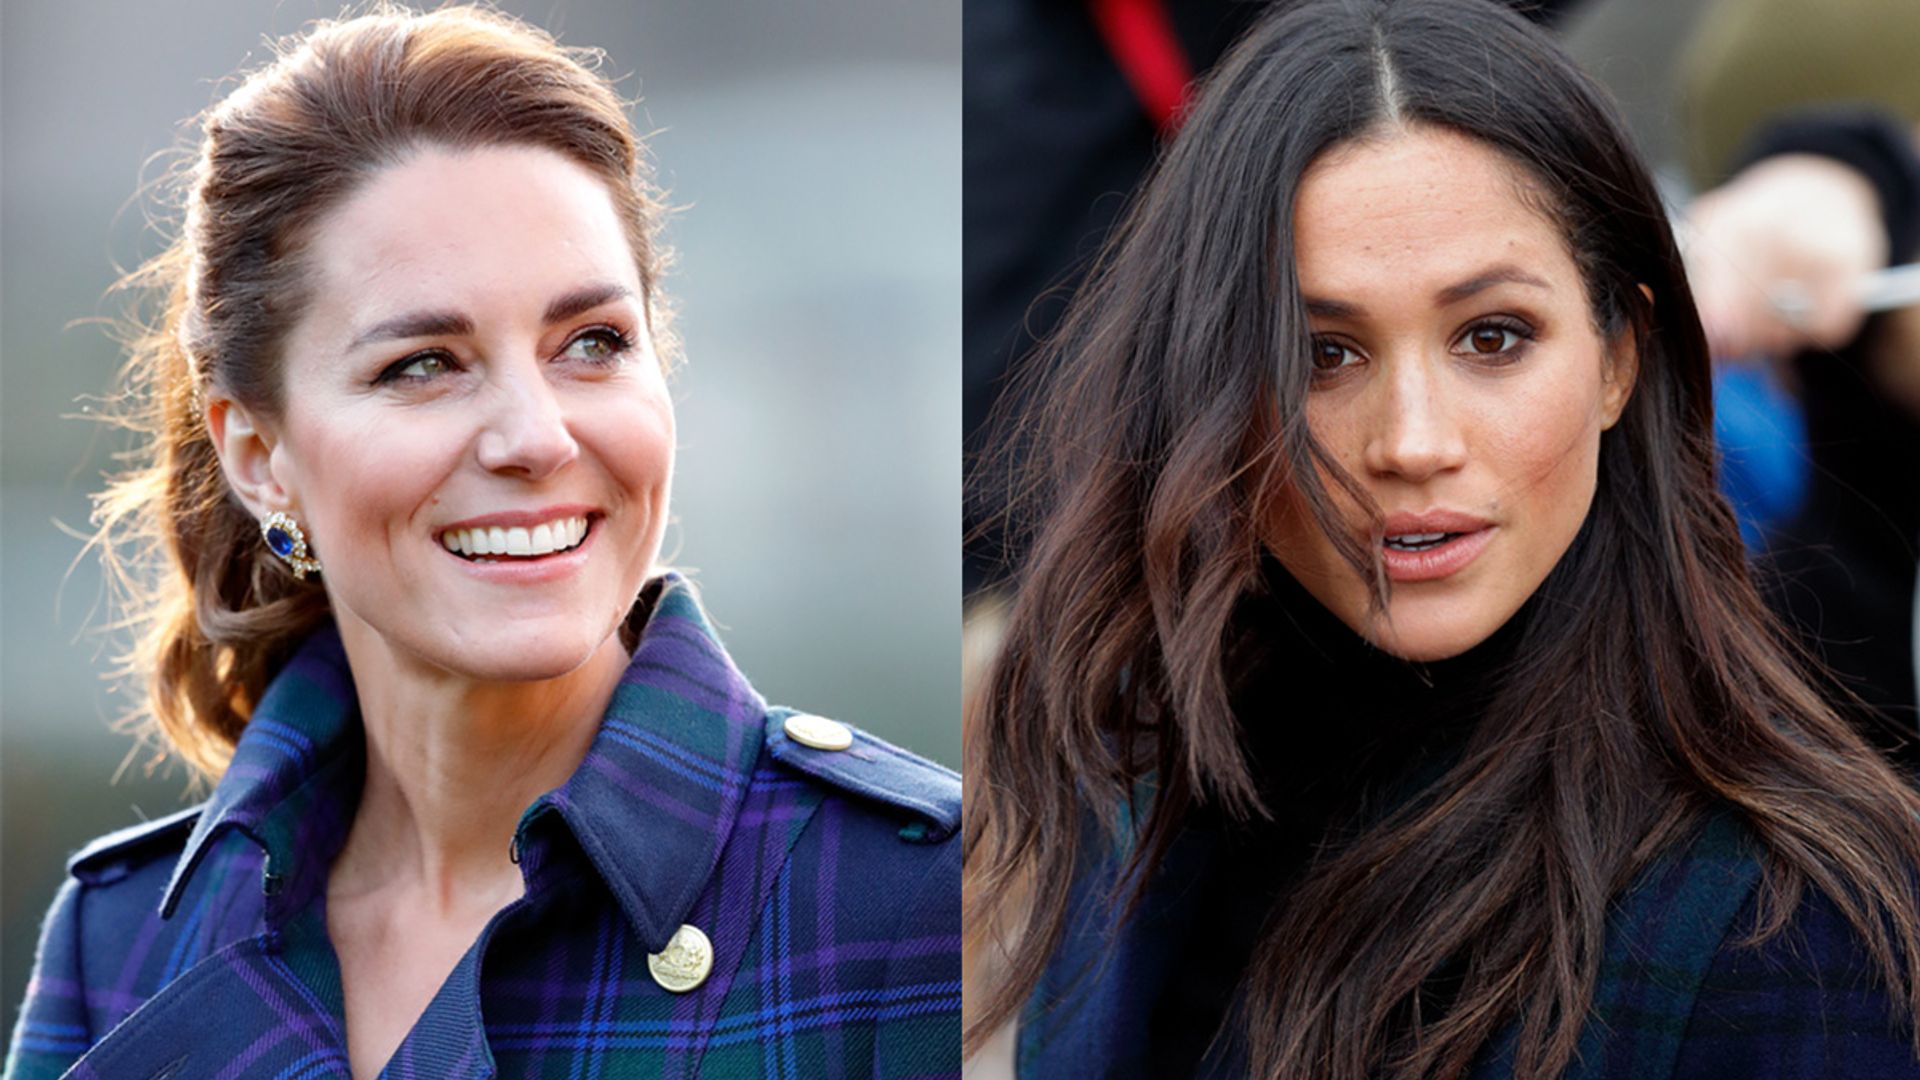 Meghan Markle took 'inspiration' from Kate Middleton's look?